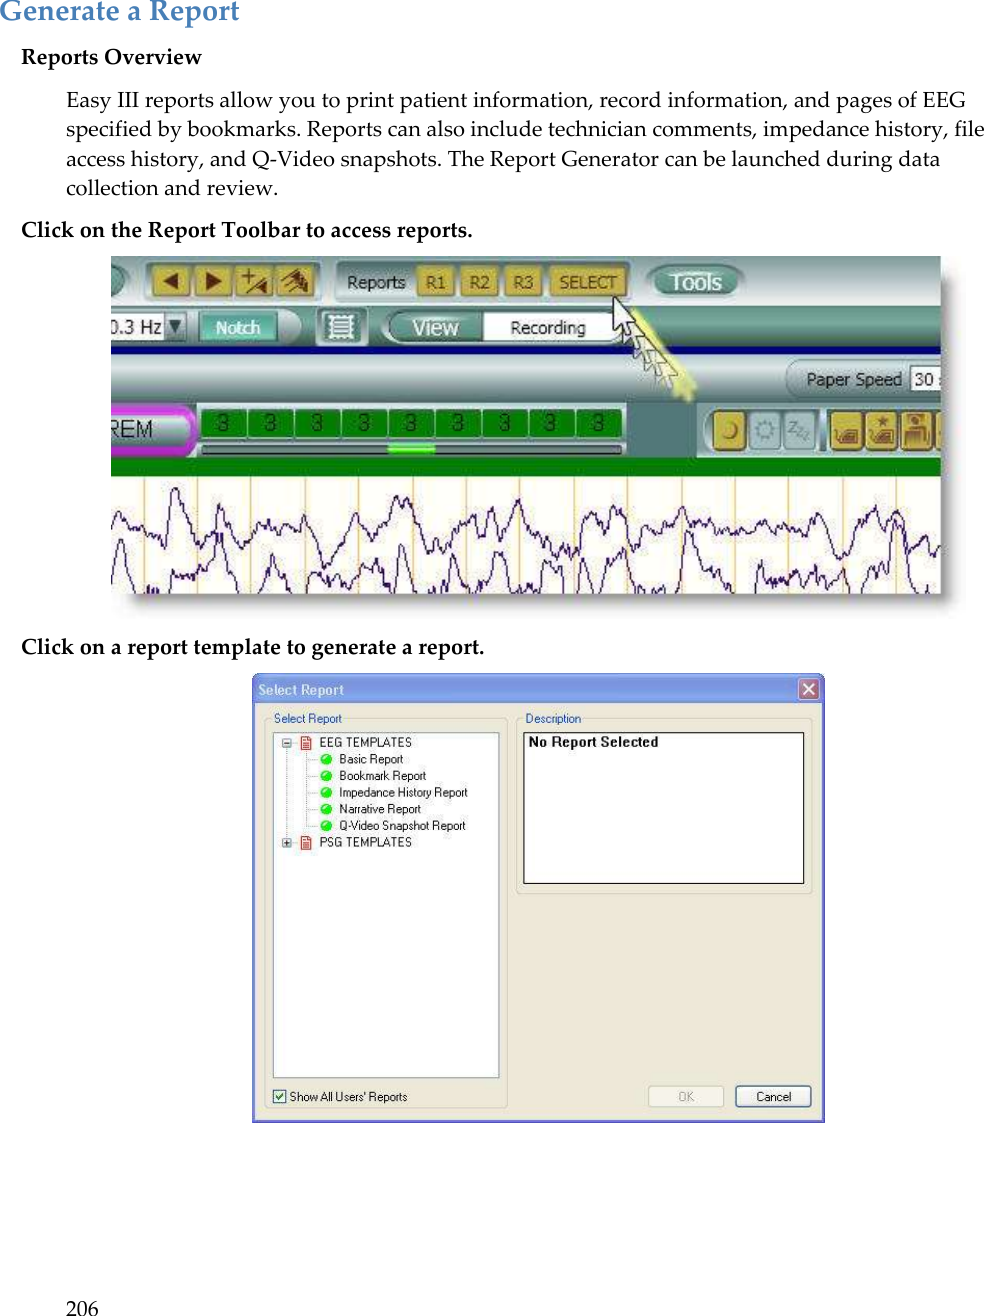 206   Generate a Report Reports Overview Easy III reports allow you to print patient information, record information, and pages of EEG specified by bookmarks. Reports can also include technician comments, impedance history, file access history, and Q-Video snapshots. The Report Generator can be launched during data collection and review. Click on the Report Toolbar to access reports.  Click on a report template to generate a report.      